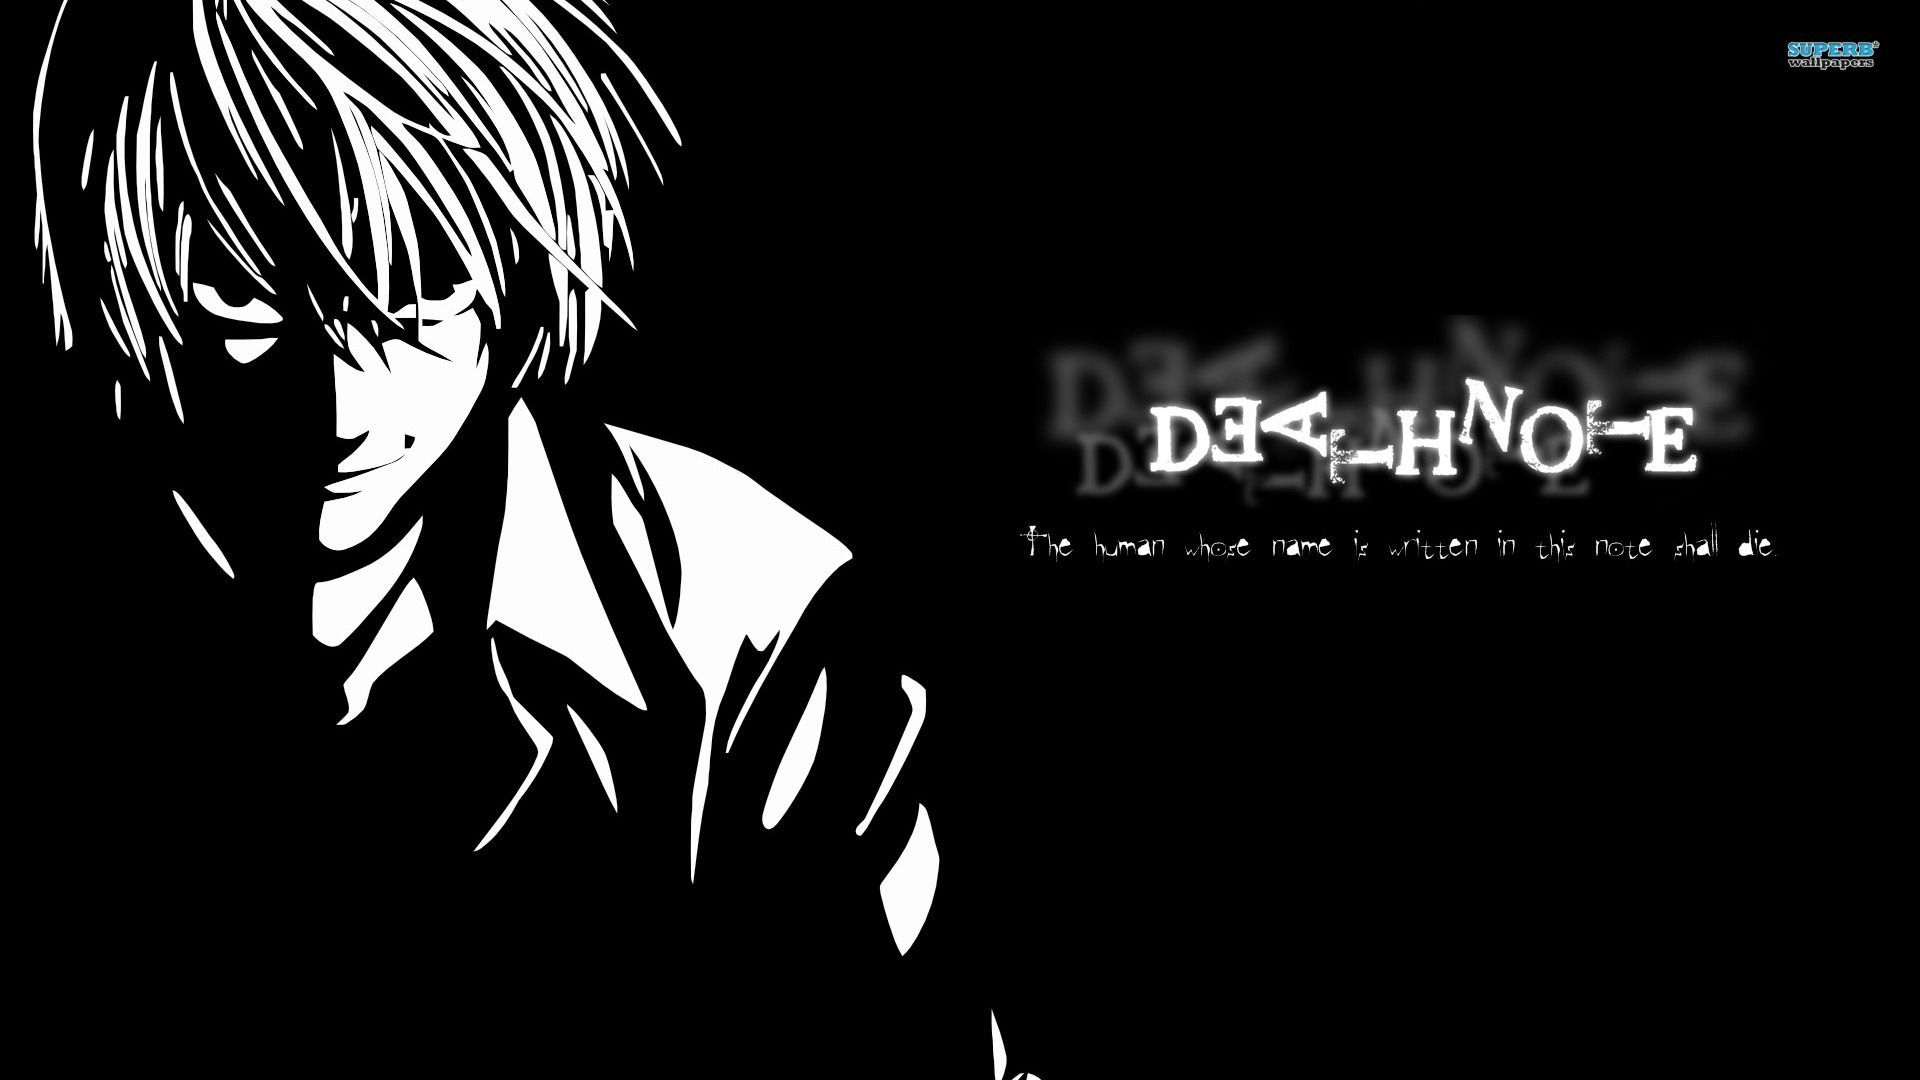 Light - Death Note wallpaper - Anime wallpapers - #13754